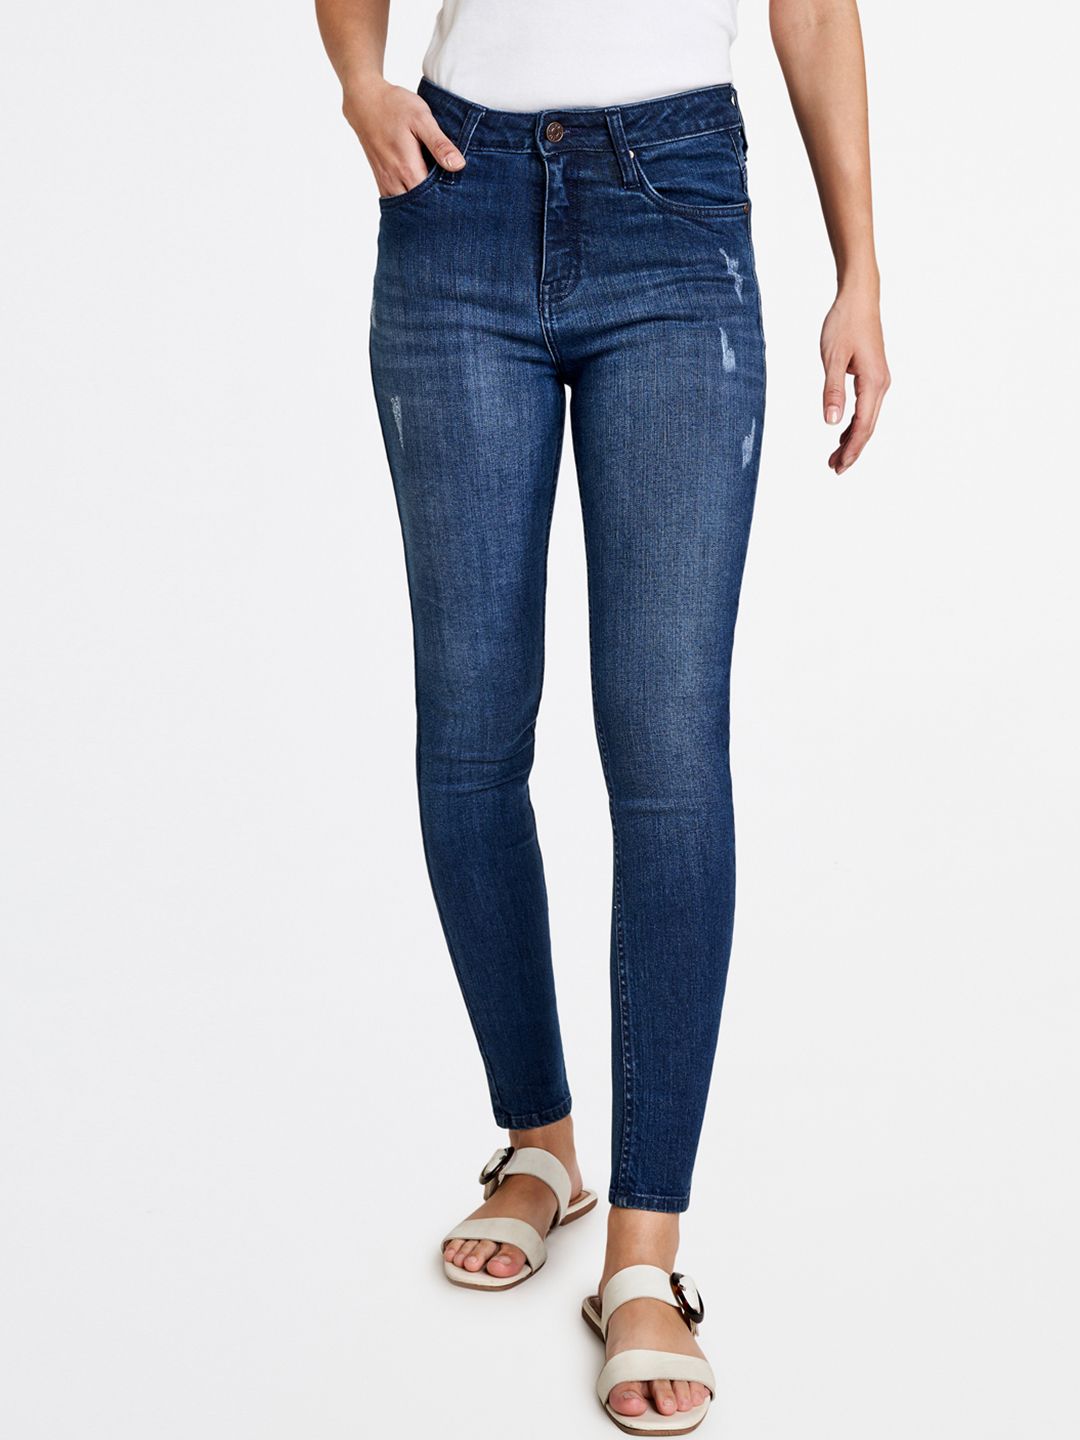 AND Women Blue Slim Fit High-Rise Clean Look Stretchable Jeans Price in India